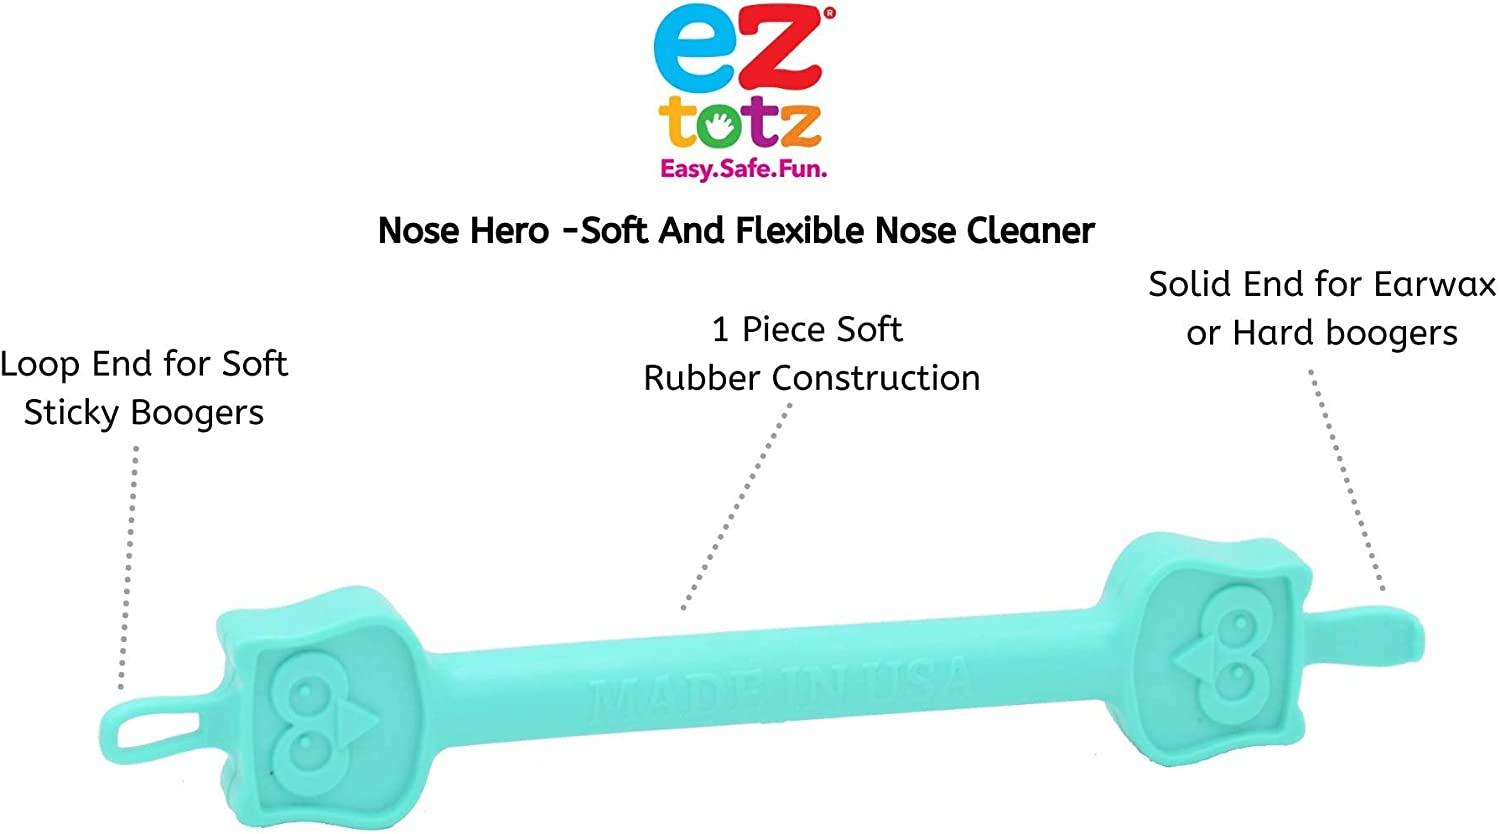 Baby Nose and Ear Cleaner Tool, Soft Flexible Rubber Nasal Booger